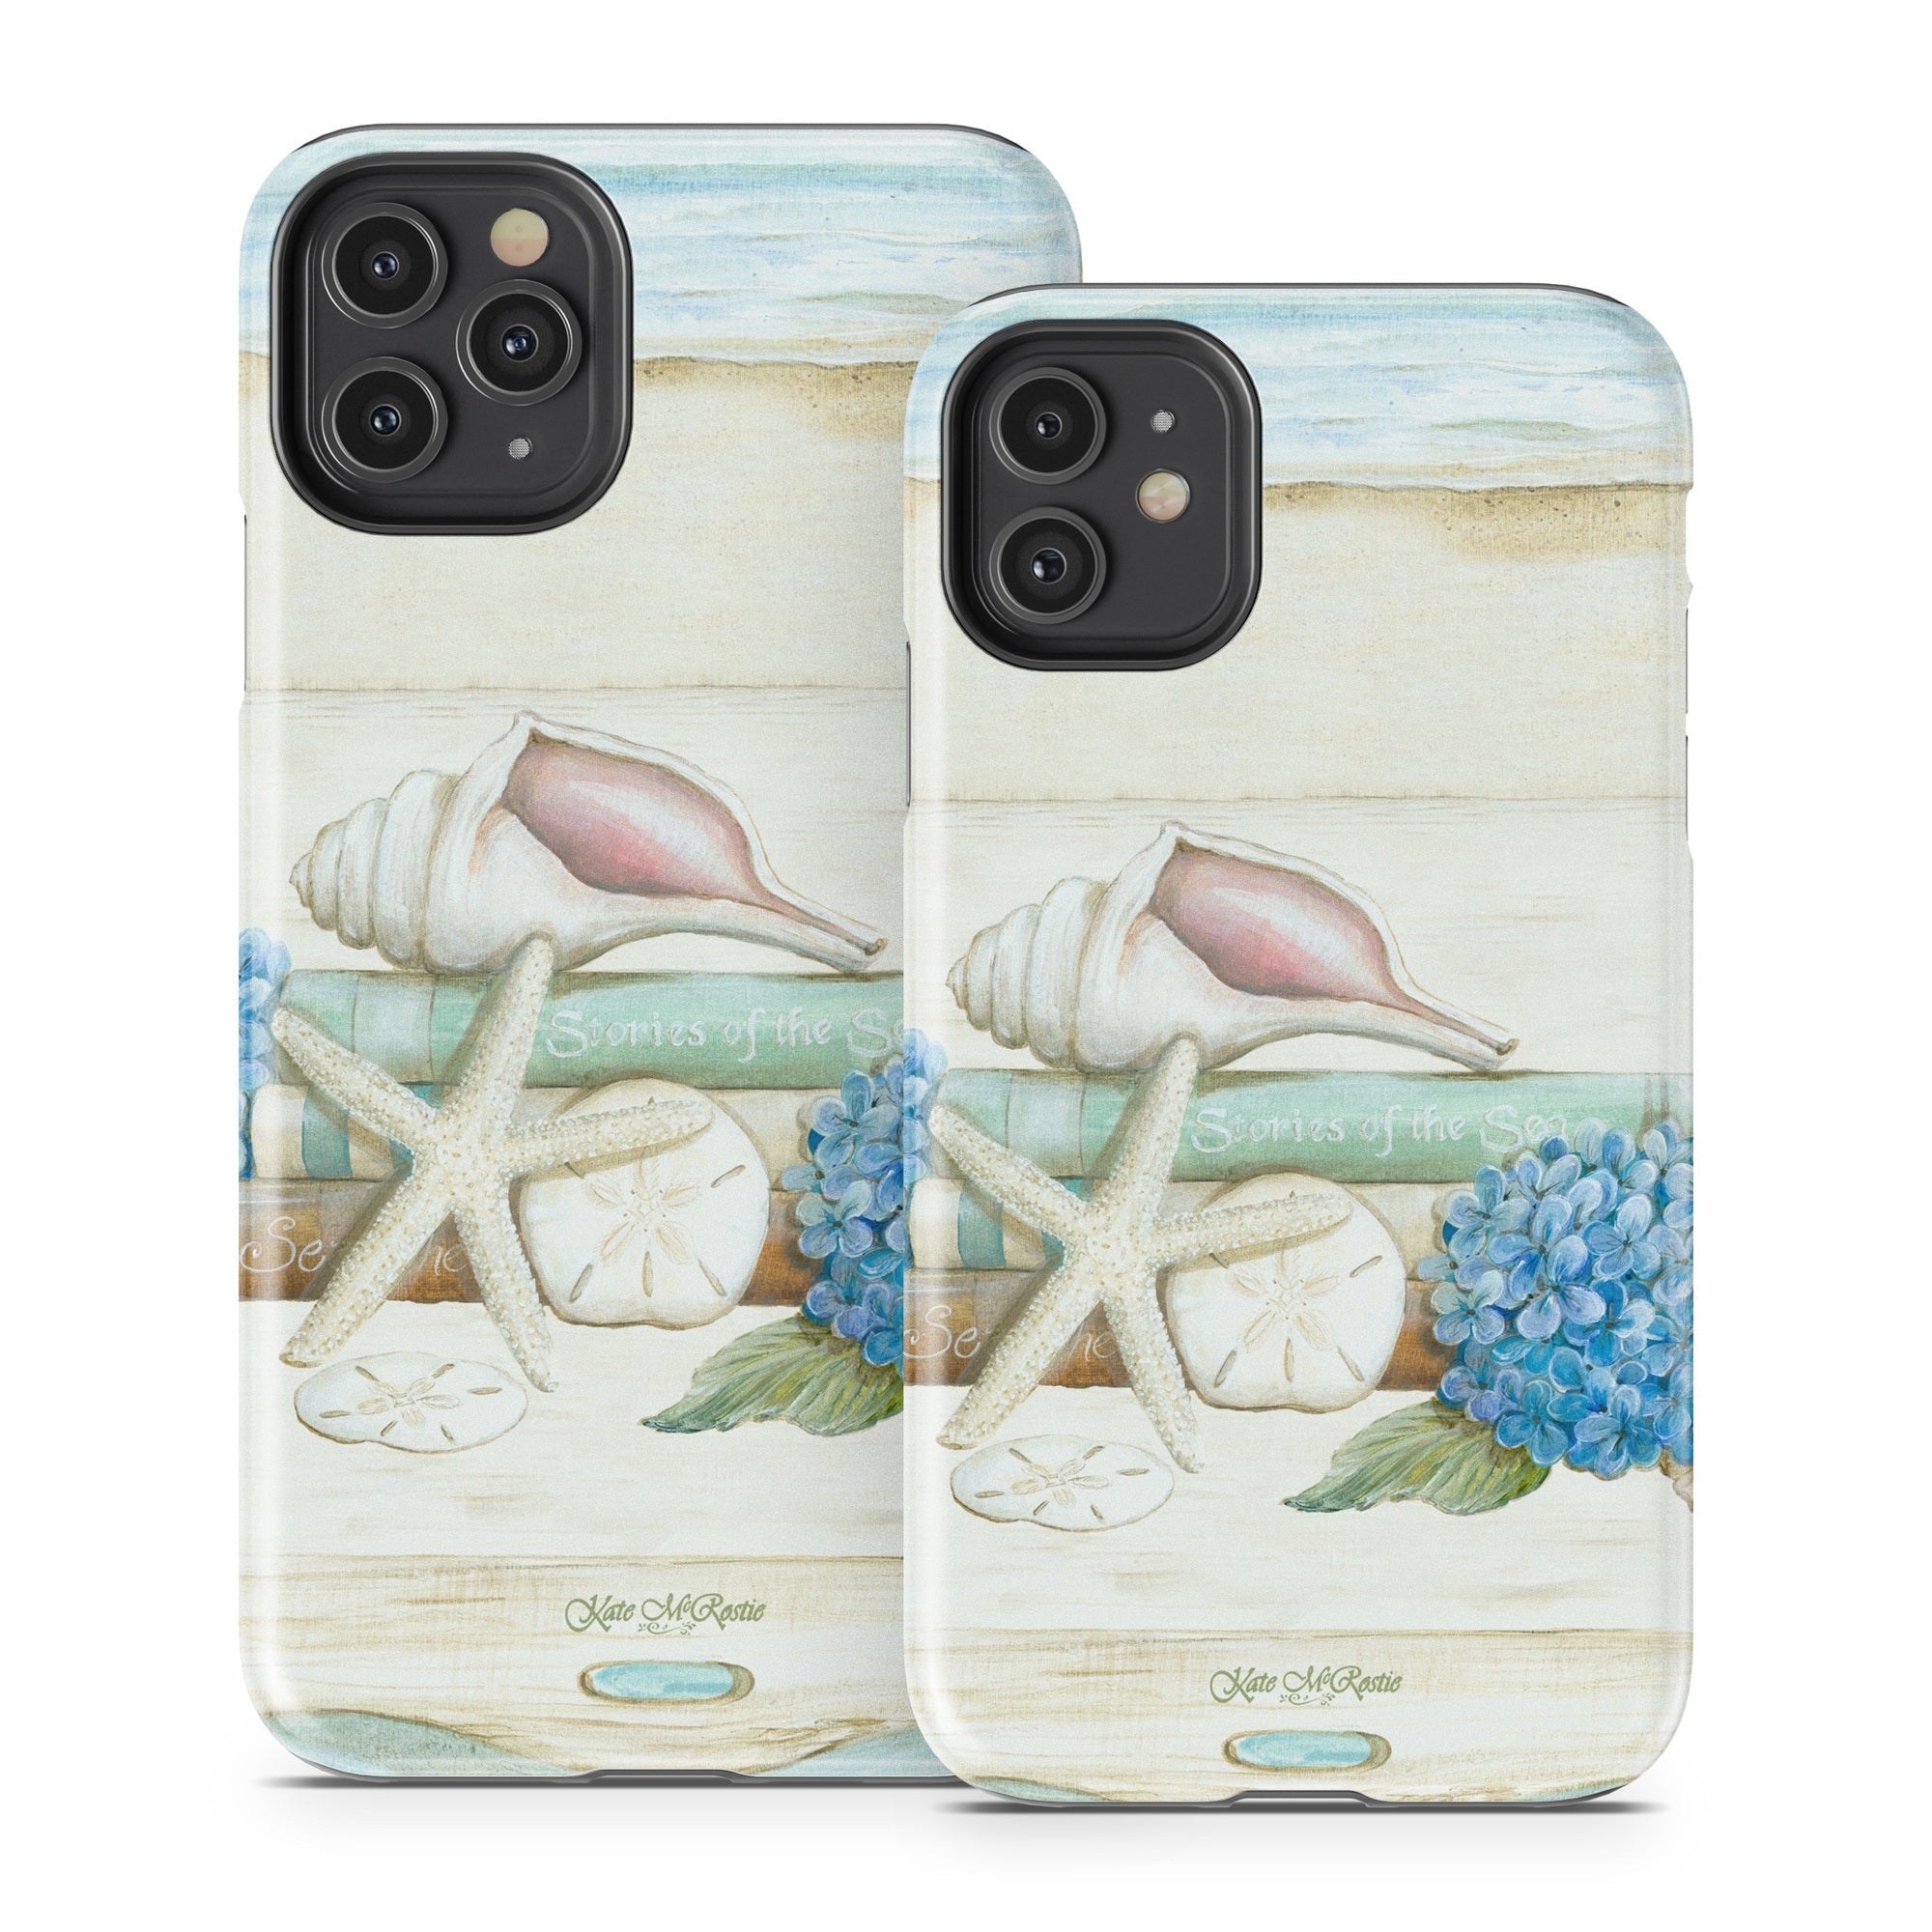 Stories of the Sea - Apple iPhone 11 Tough Case